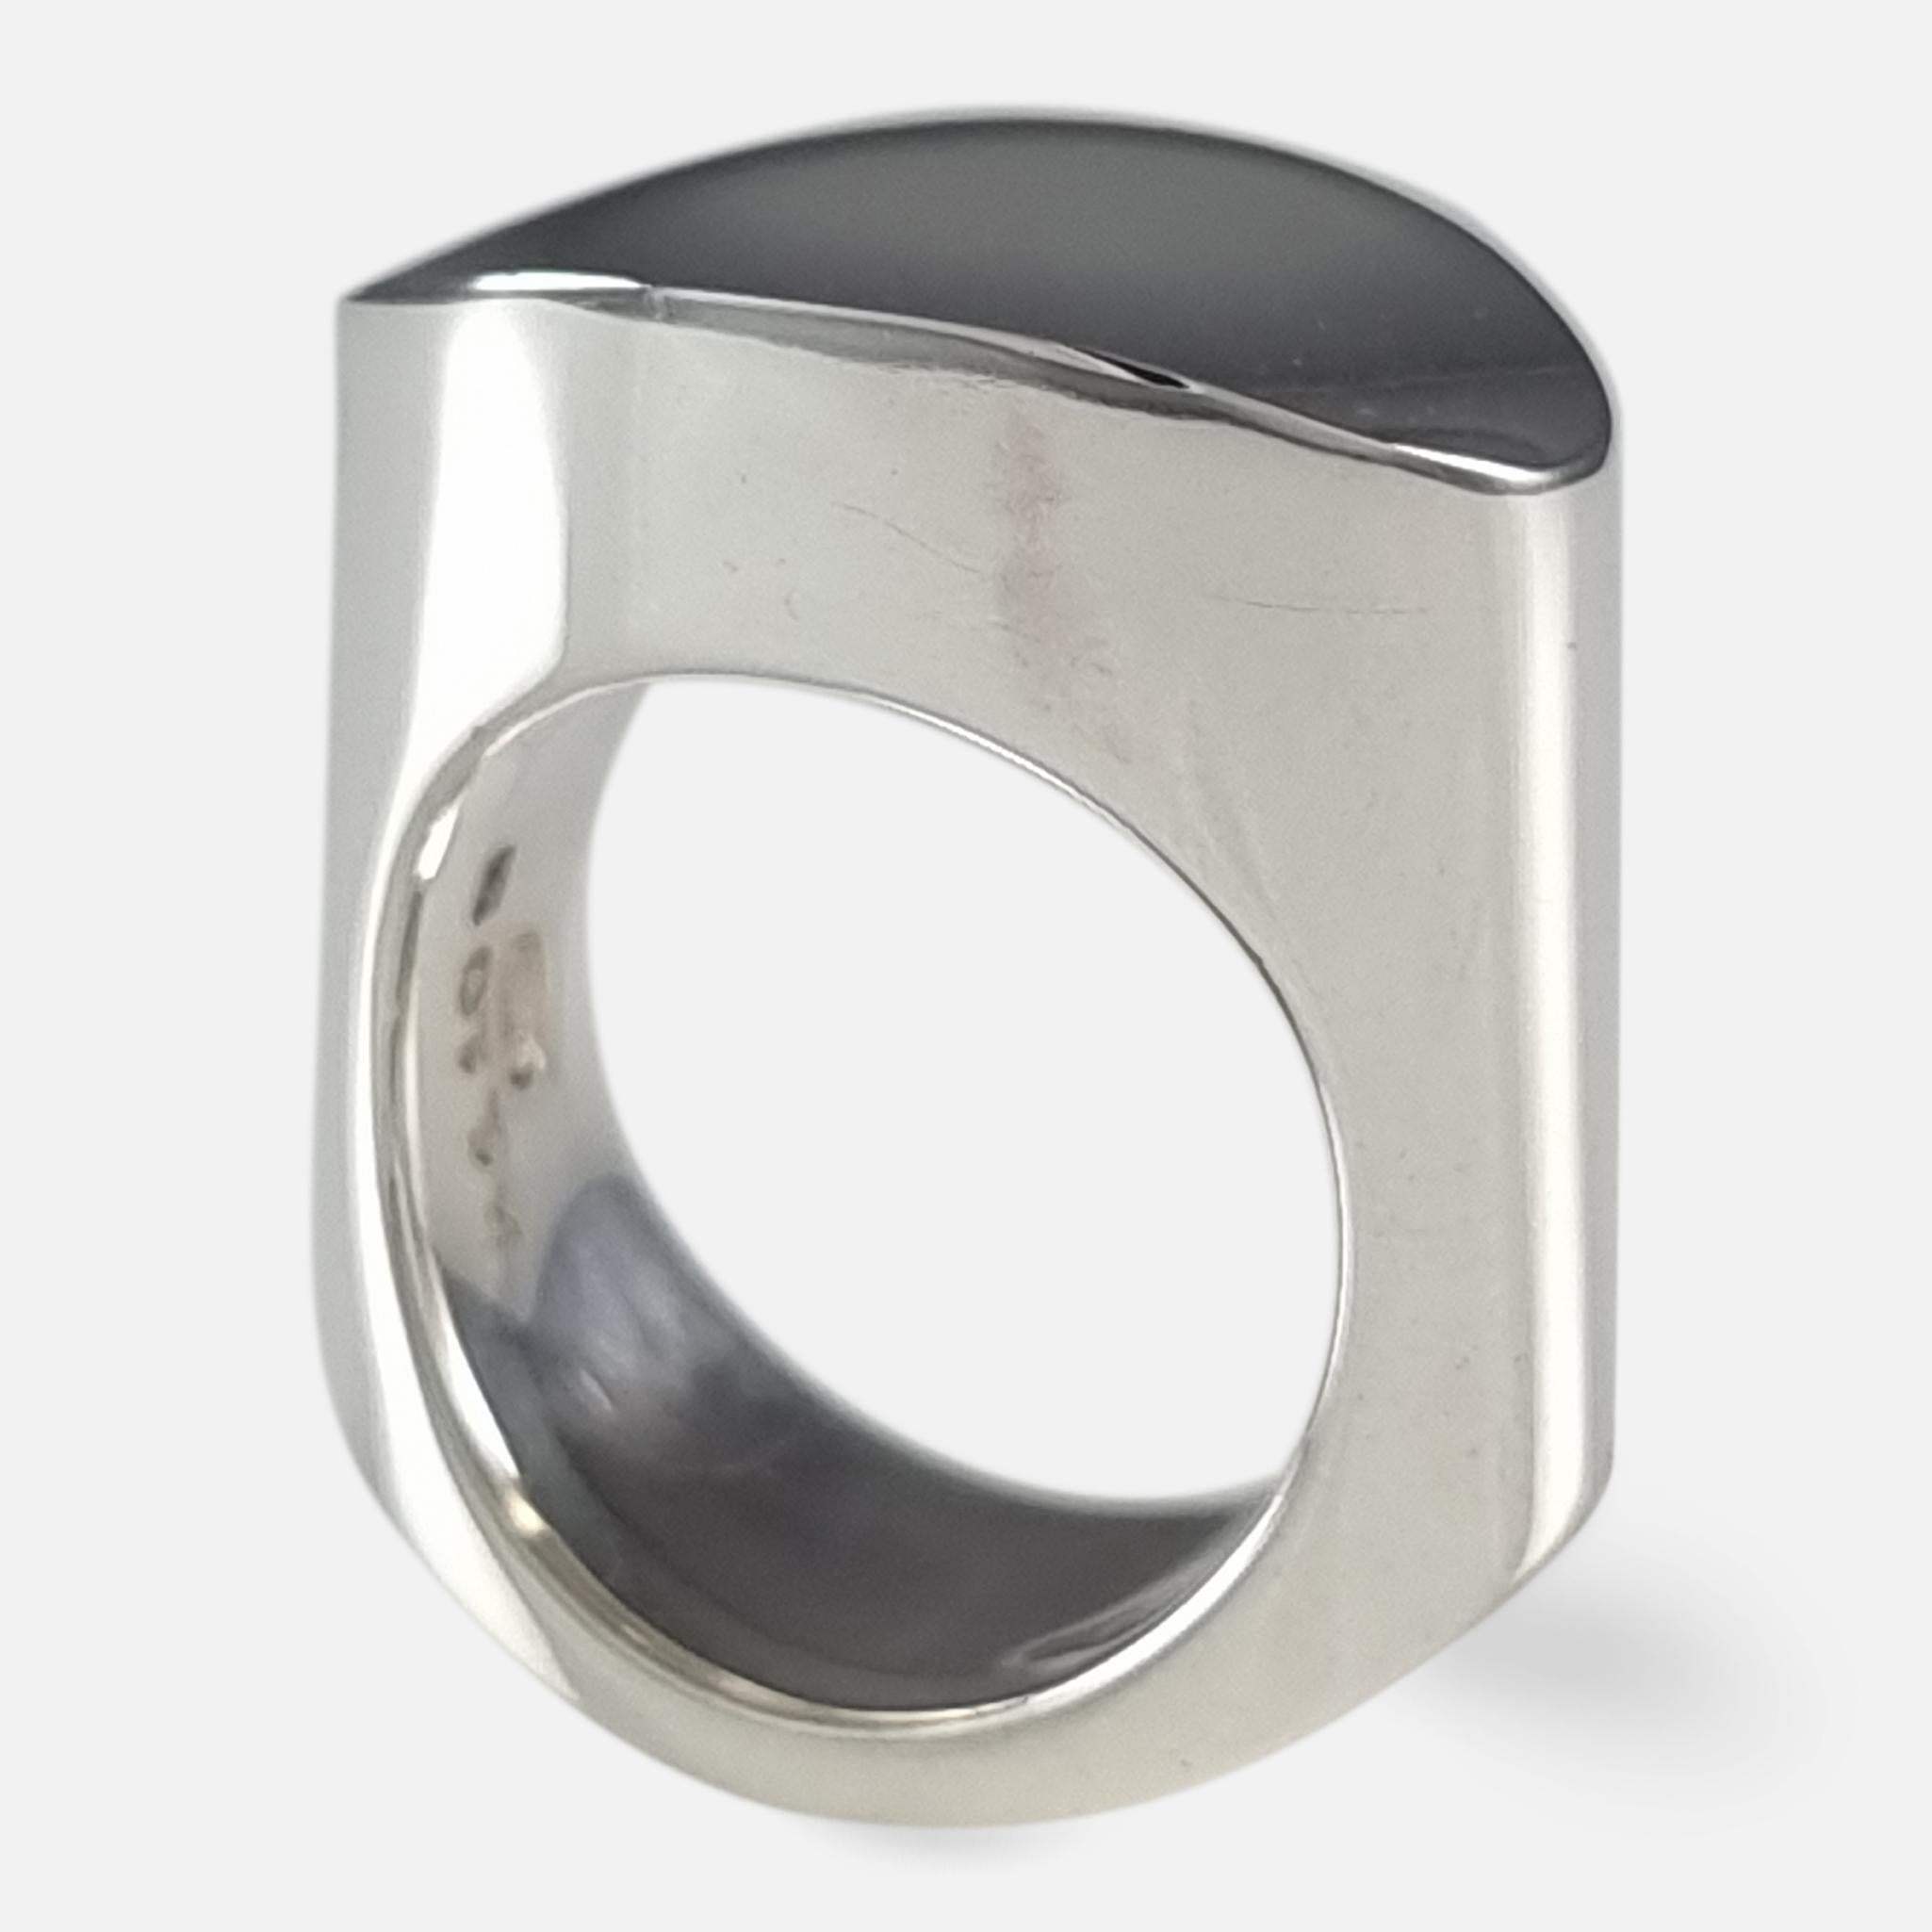 A Danish sterling silver ring, #A110B, designed by Andreas Mikkelsen for Georg Jensen.

Stamped Georg Jensen within dotted oval mark, '925 S', 'Denmark', and 'A110B'. The ring is hallmarked with Edinburgh assay marks, and the Common Control Mark